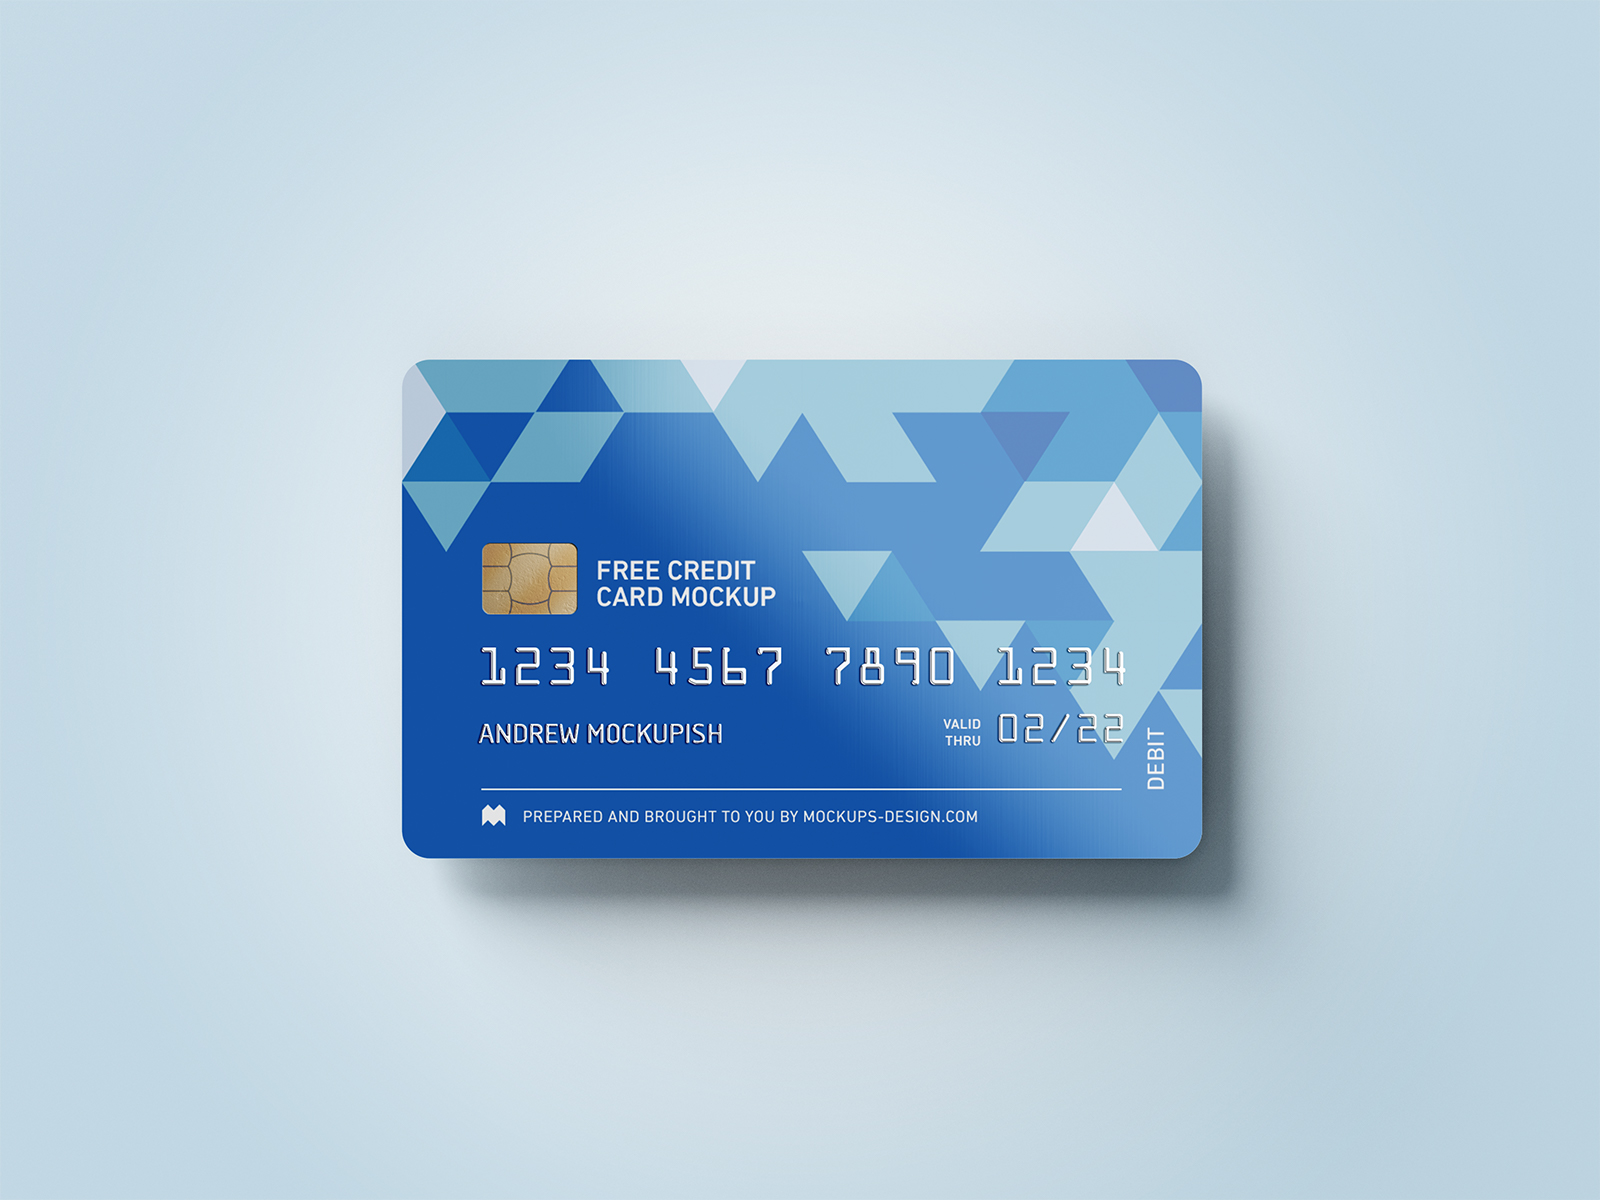 View Credit Card Mockup Generator Use Include PSD